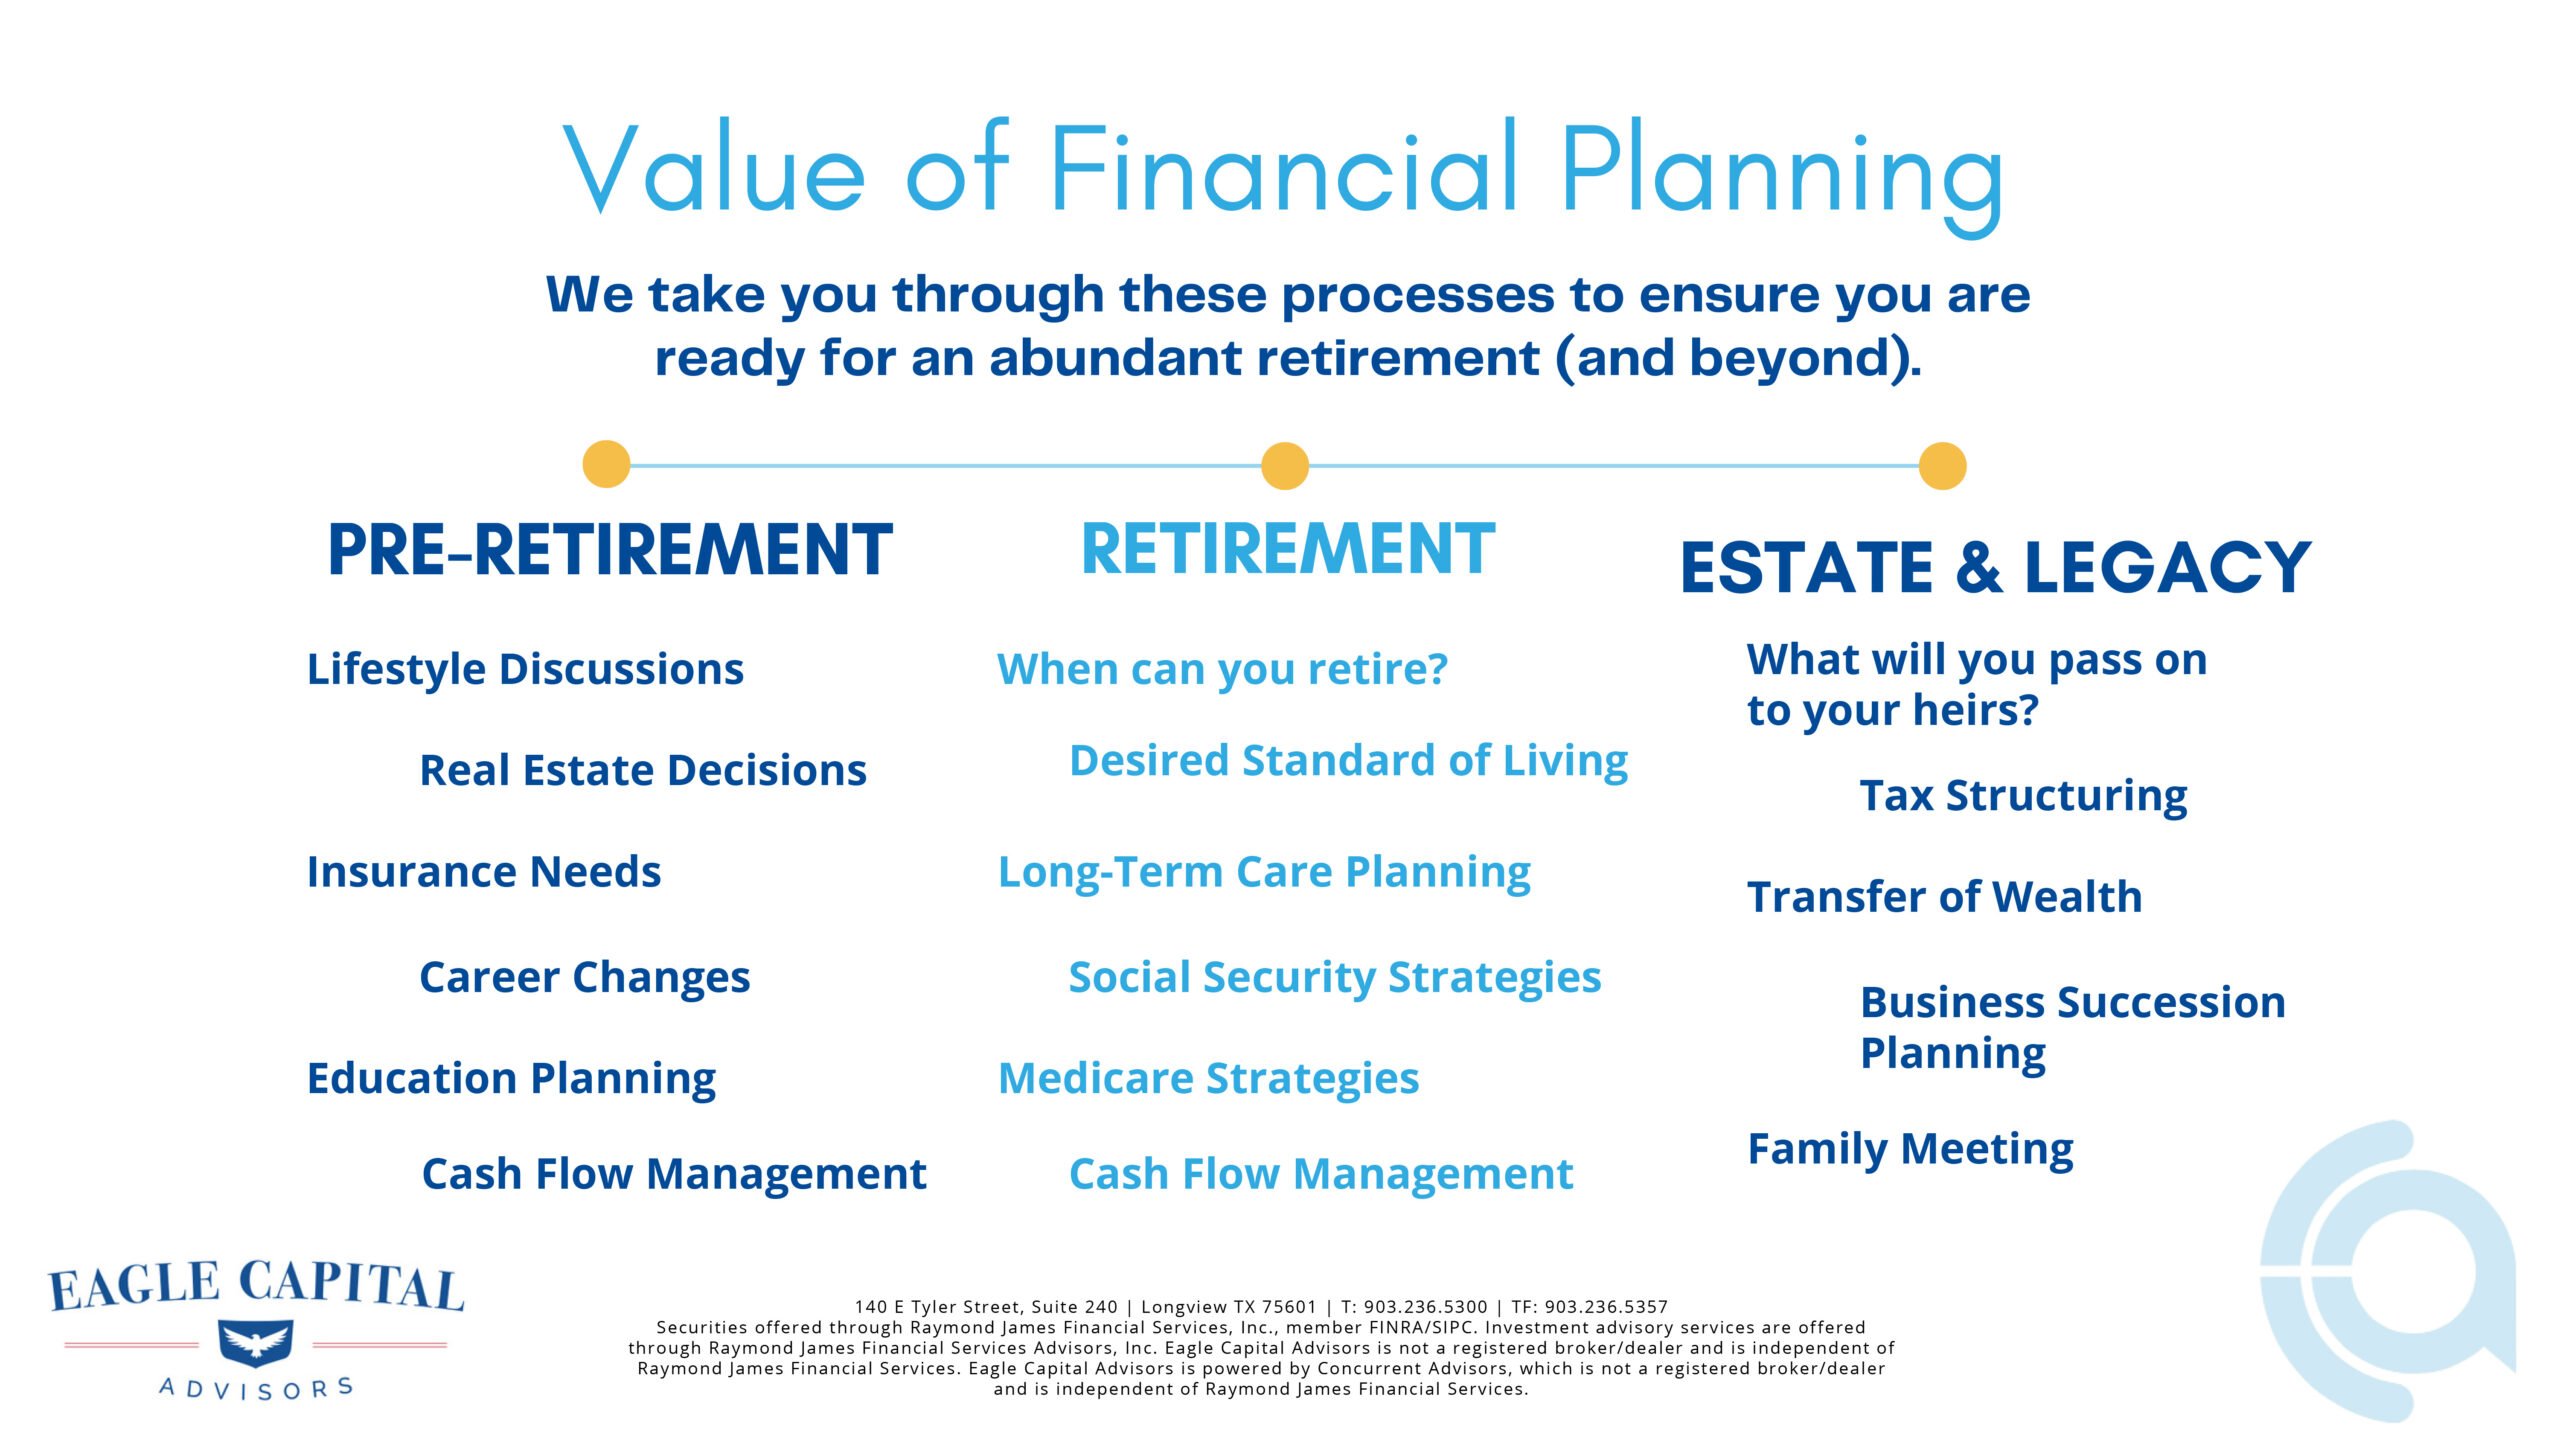 Value of Financial Planning